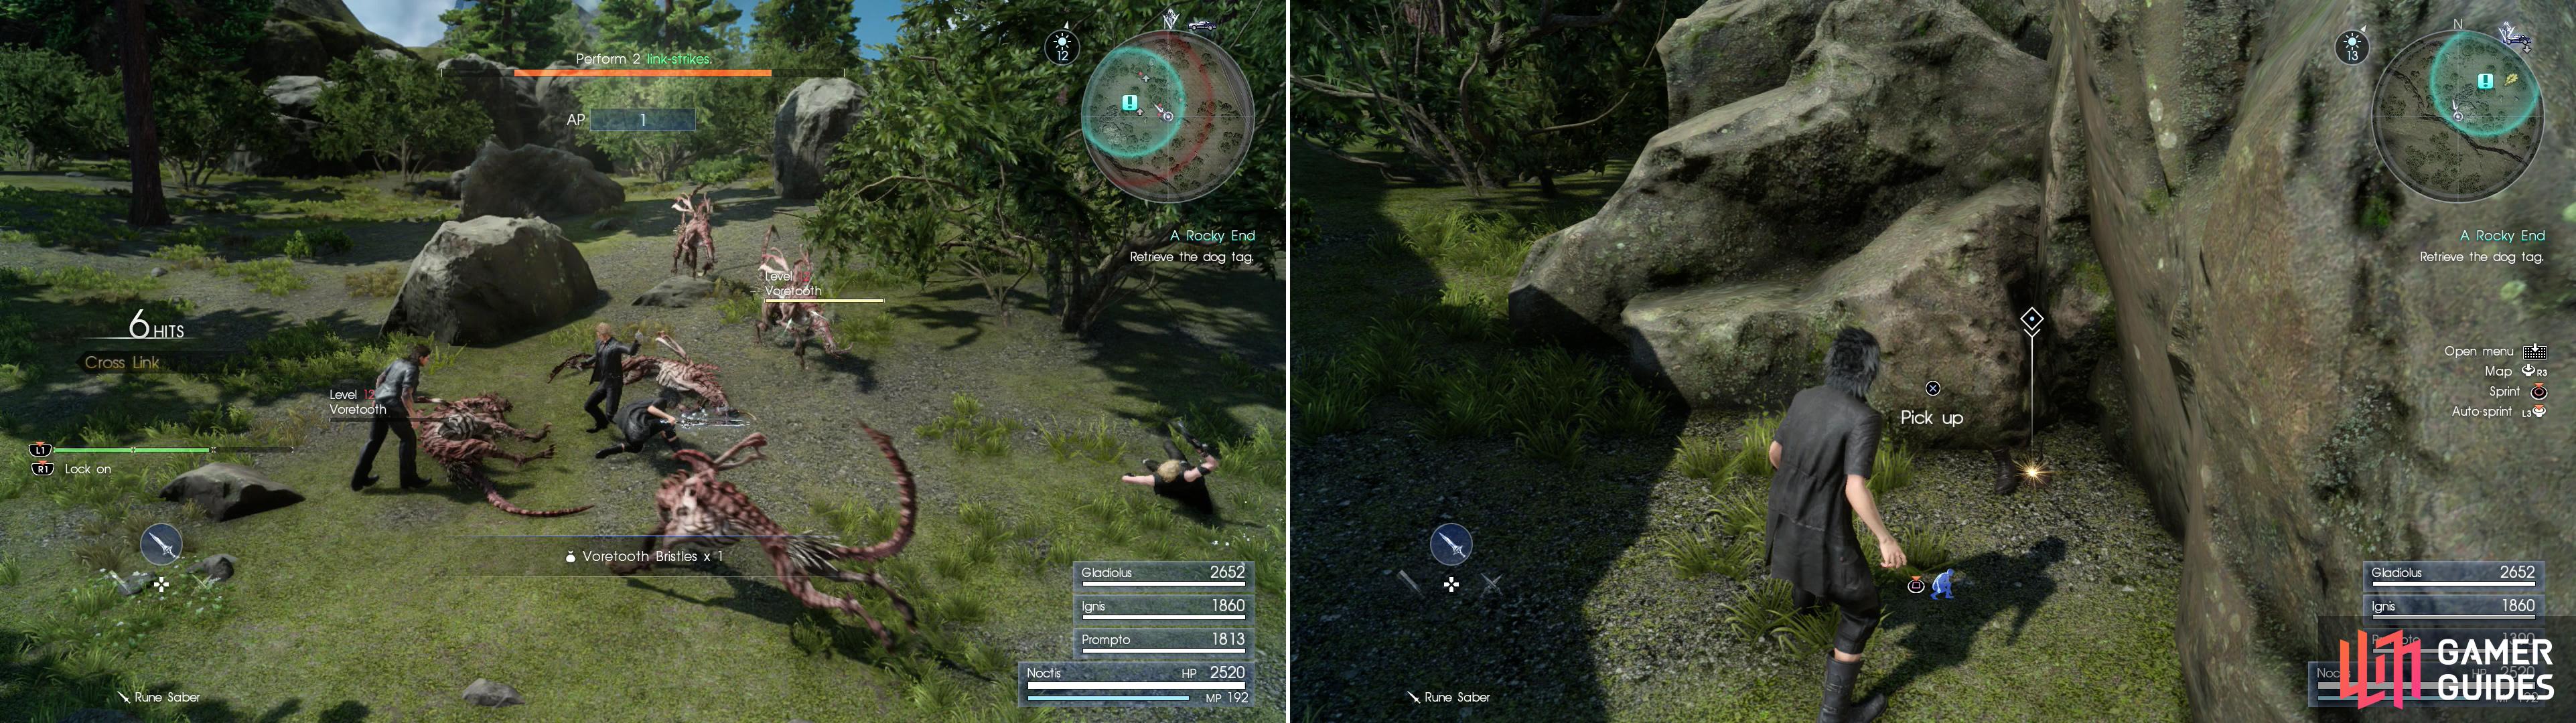 Fight through a pack of Voretooths (left) then grab the Scorched Dog Tag near the boulder (right).